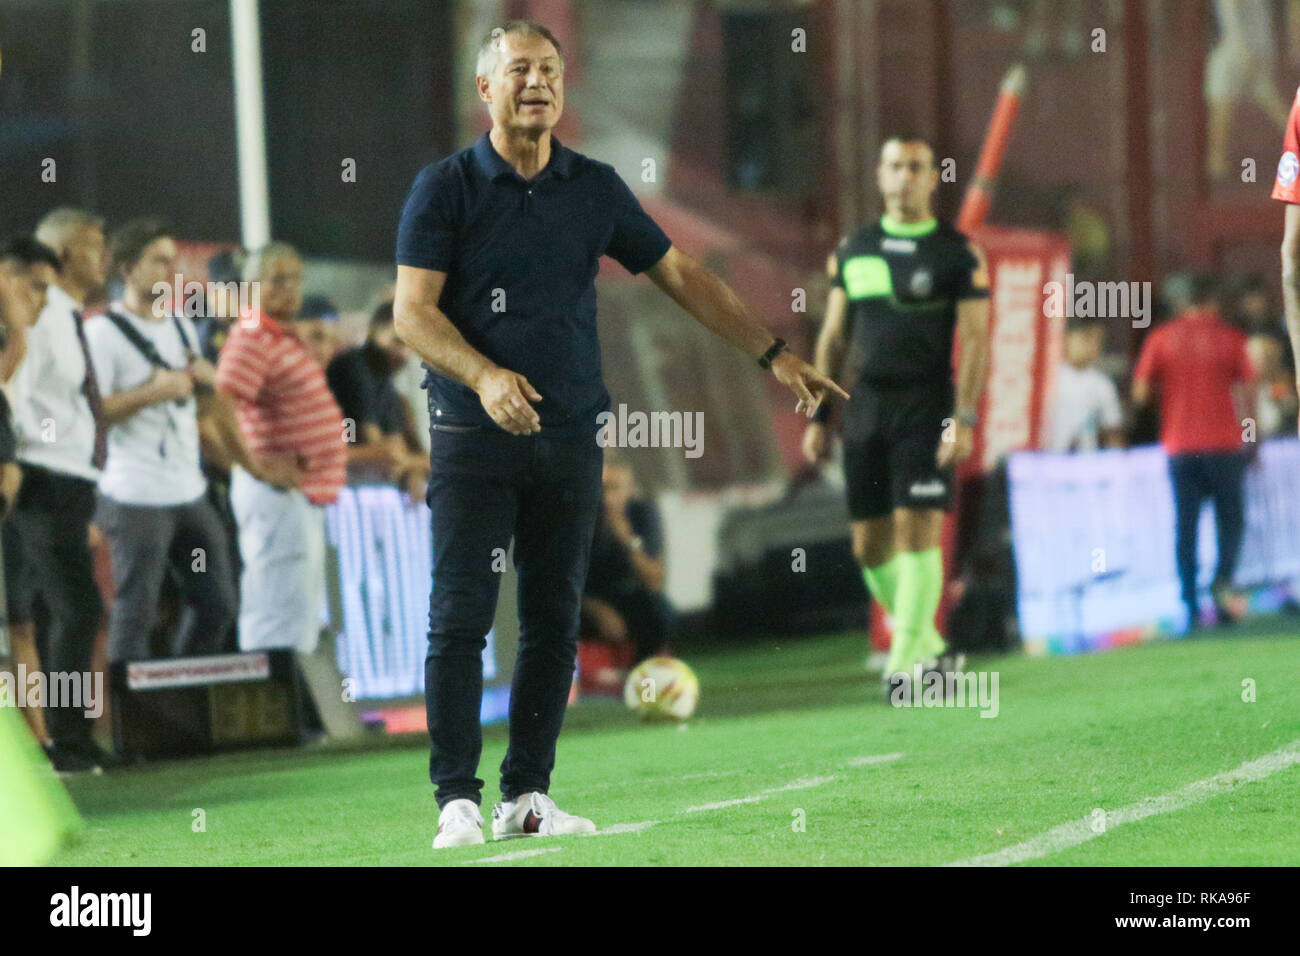 BUENOS AIRES, 09.02.2019: Ariel Holan, coach of Independiente, during the match of Superliga Argentina between INDEPENDIENTE and UNION on Libertadores de America Stadium on Buenos Aires, Argentina. (Photo: Néstor J. Beremblum / Alamy News) Stock Photo